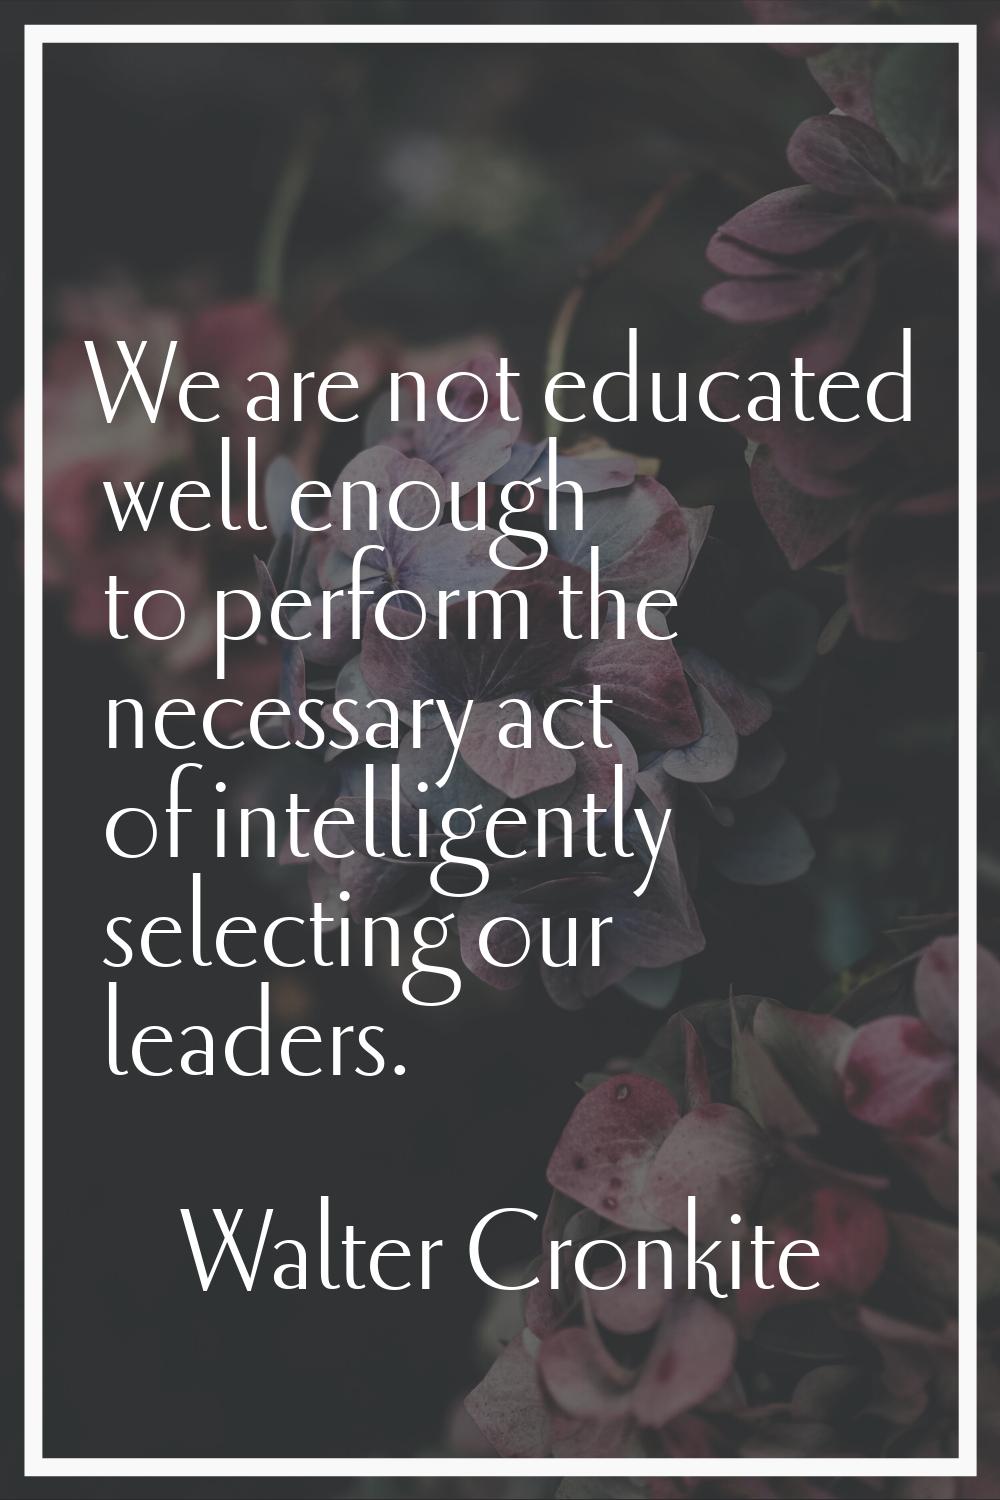 We are not educated well enough to perform the necessary act of intelligently selecting our leaders